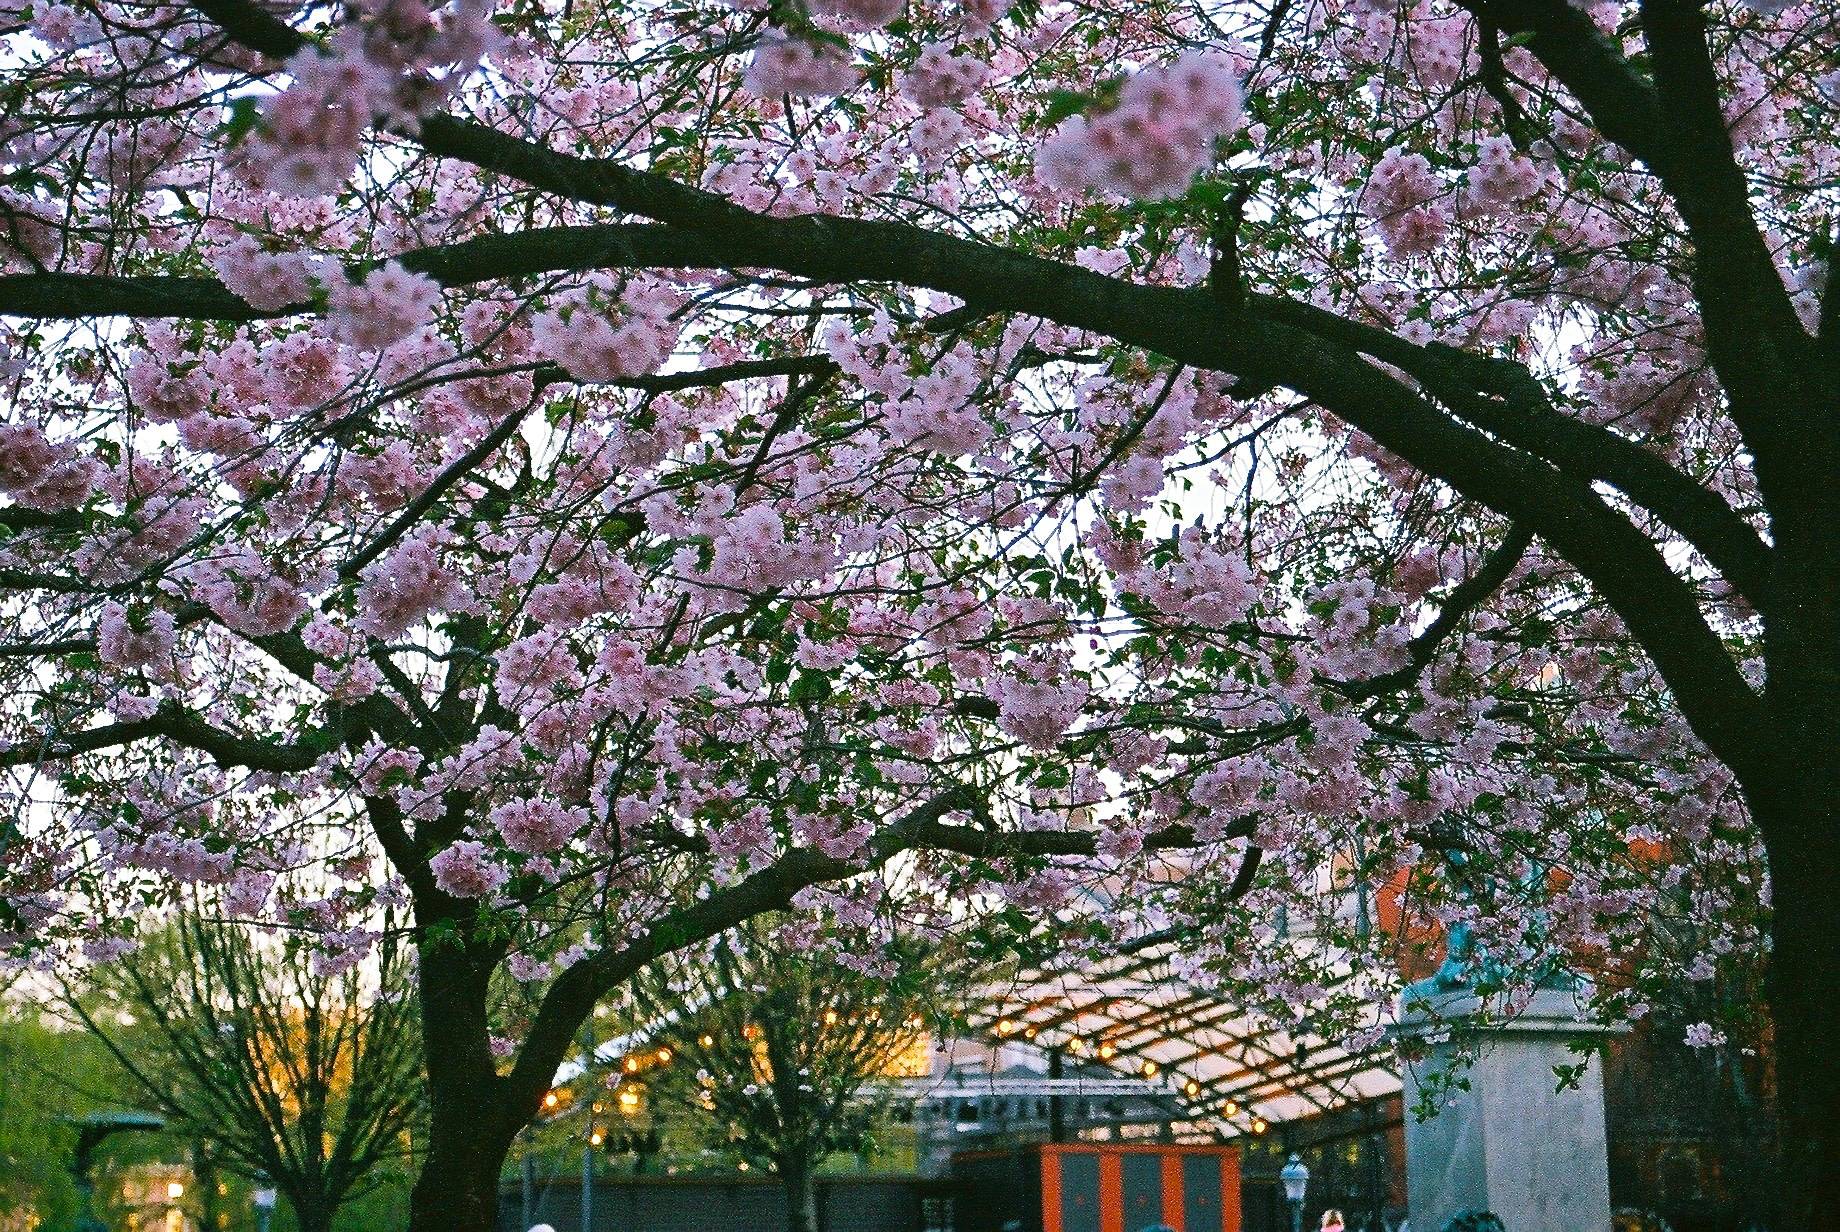 tree branches and cherry blossoms covering the whole image